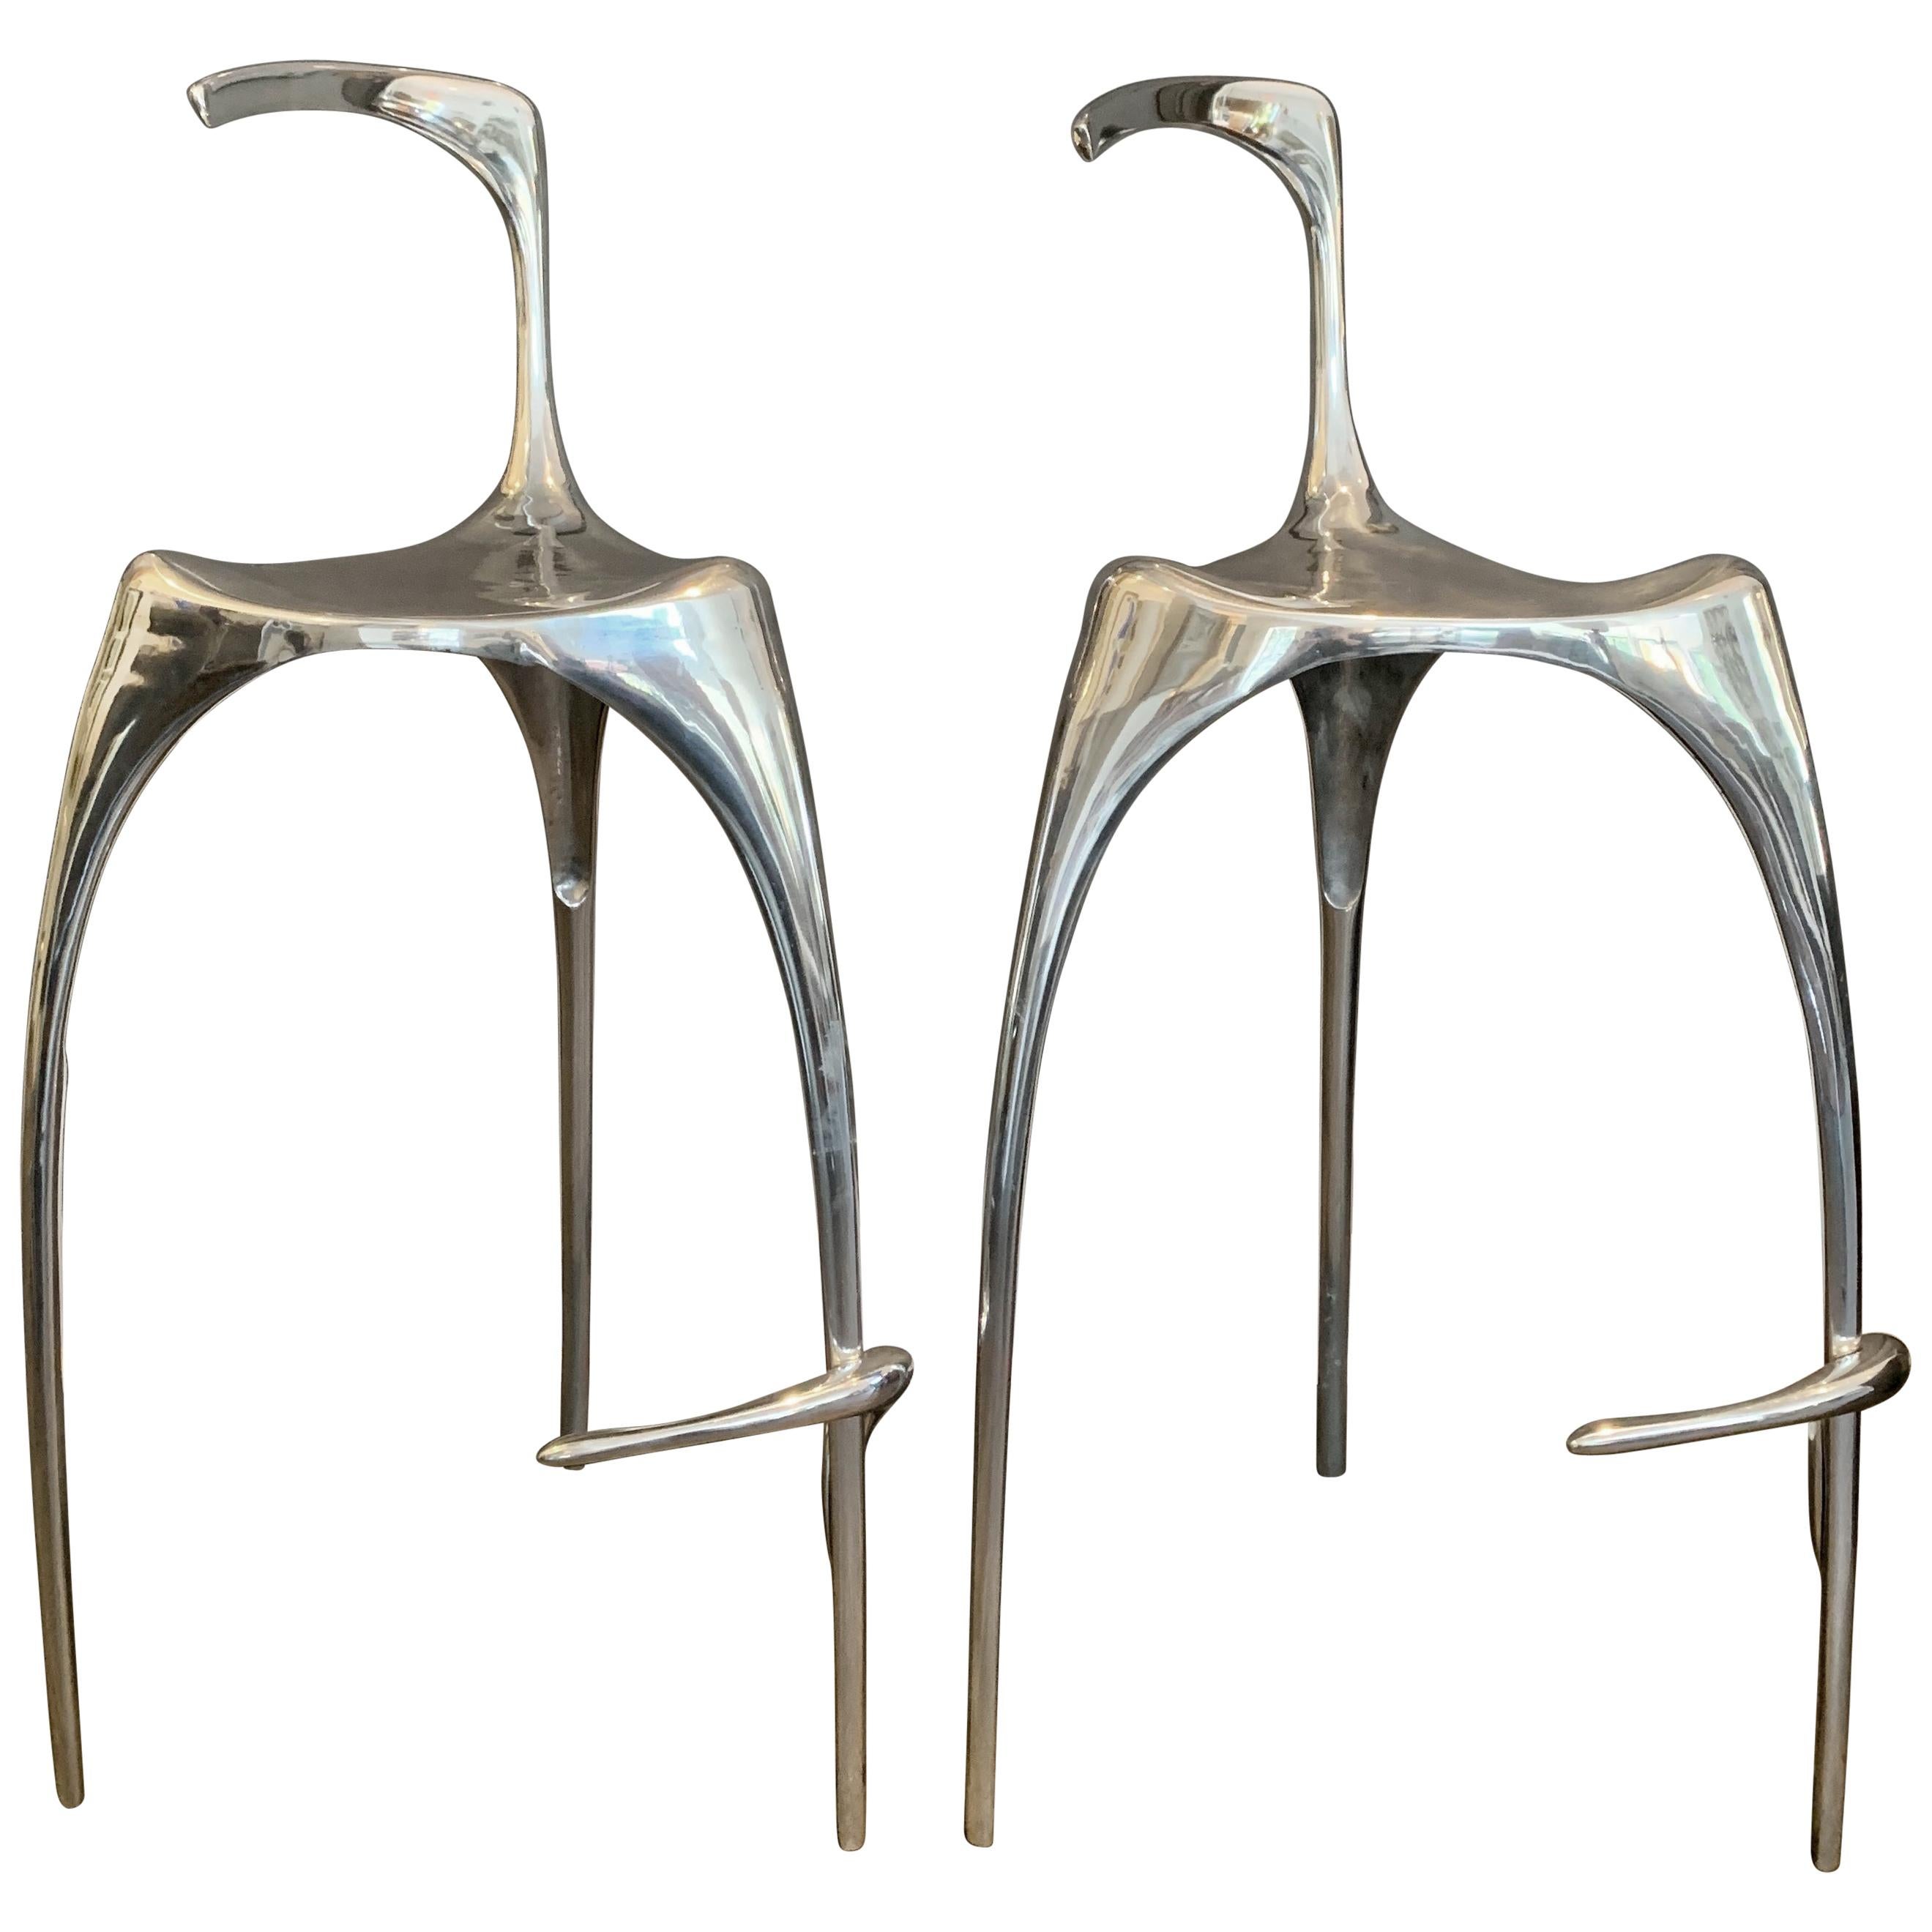 Three-Legged Sculptural Pair of Heavy Polished Aluminum Bar Stools For Sale